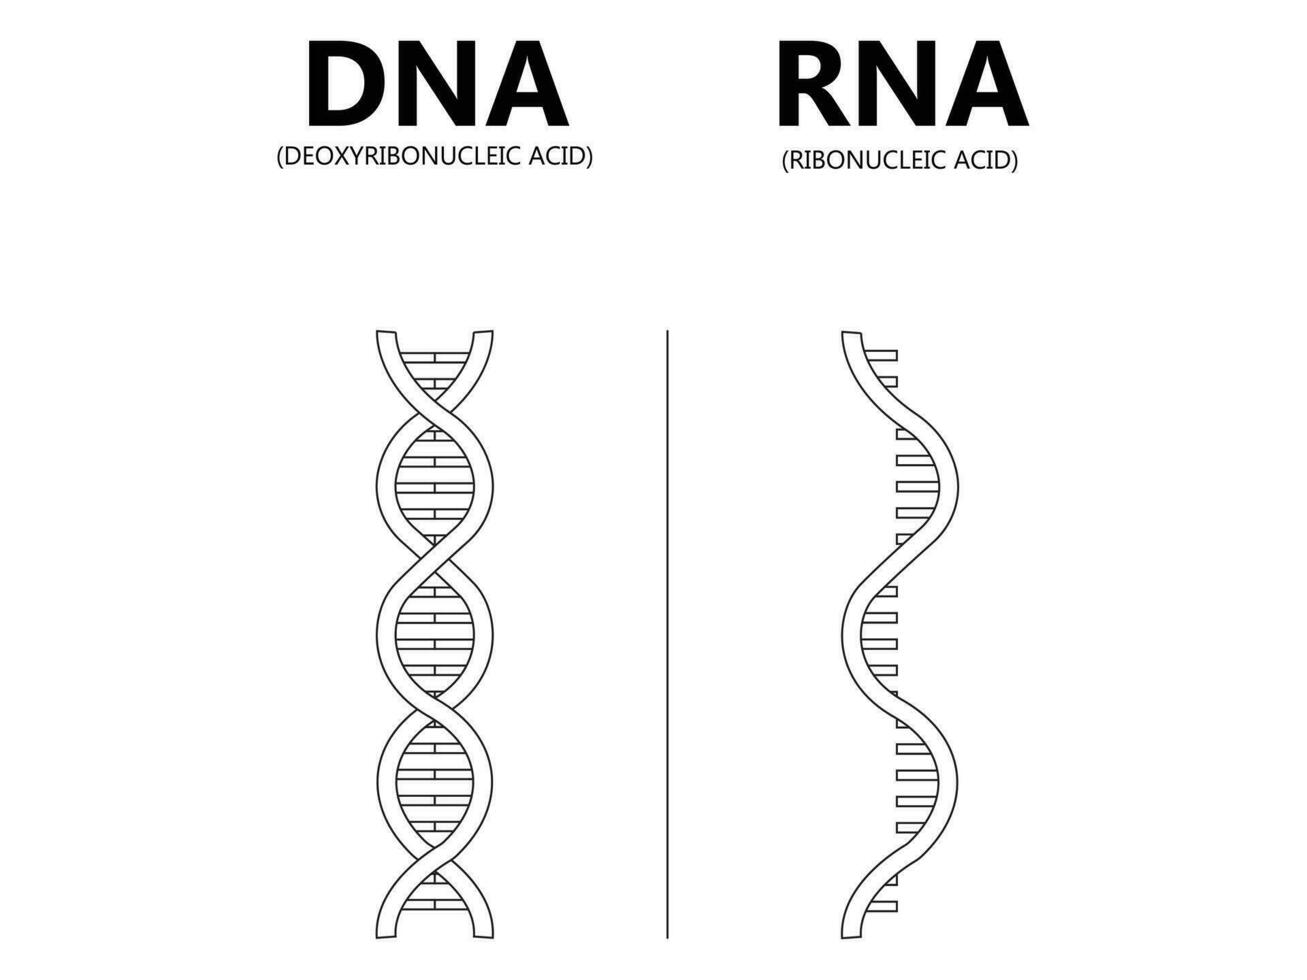 DNA vs. RNA vector illustration. Educational genetic acid explanation diagram. Nucleobase structure labeled scheme. Ribonucleic and deoxyribonucleic molecule helix chain differences comparison.